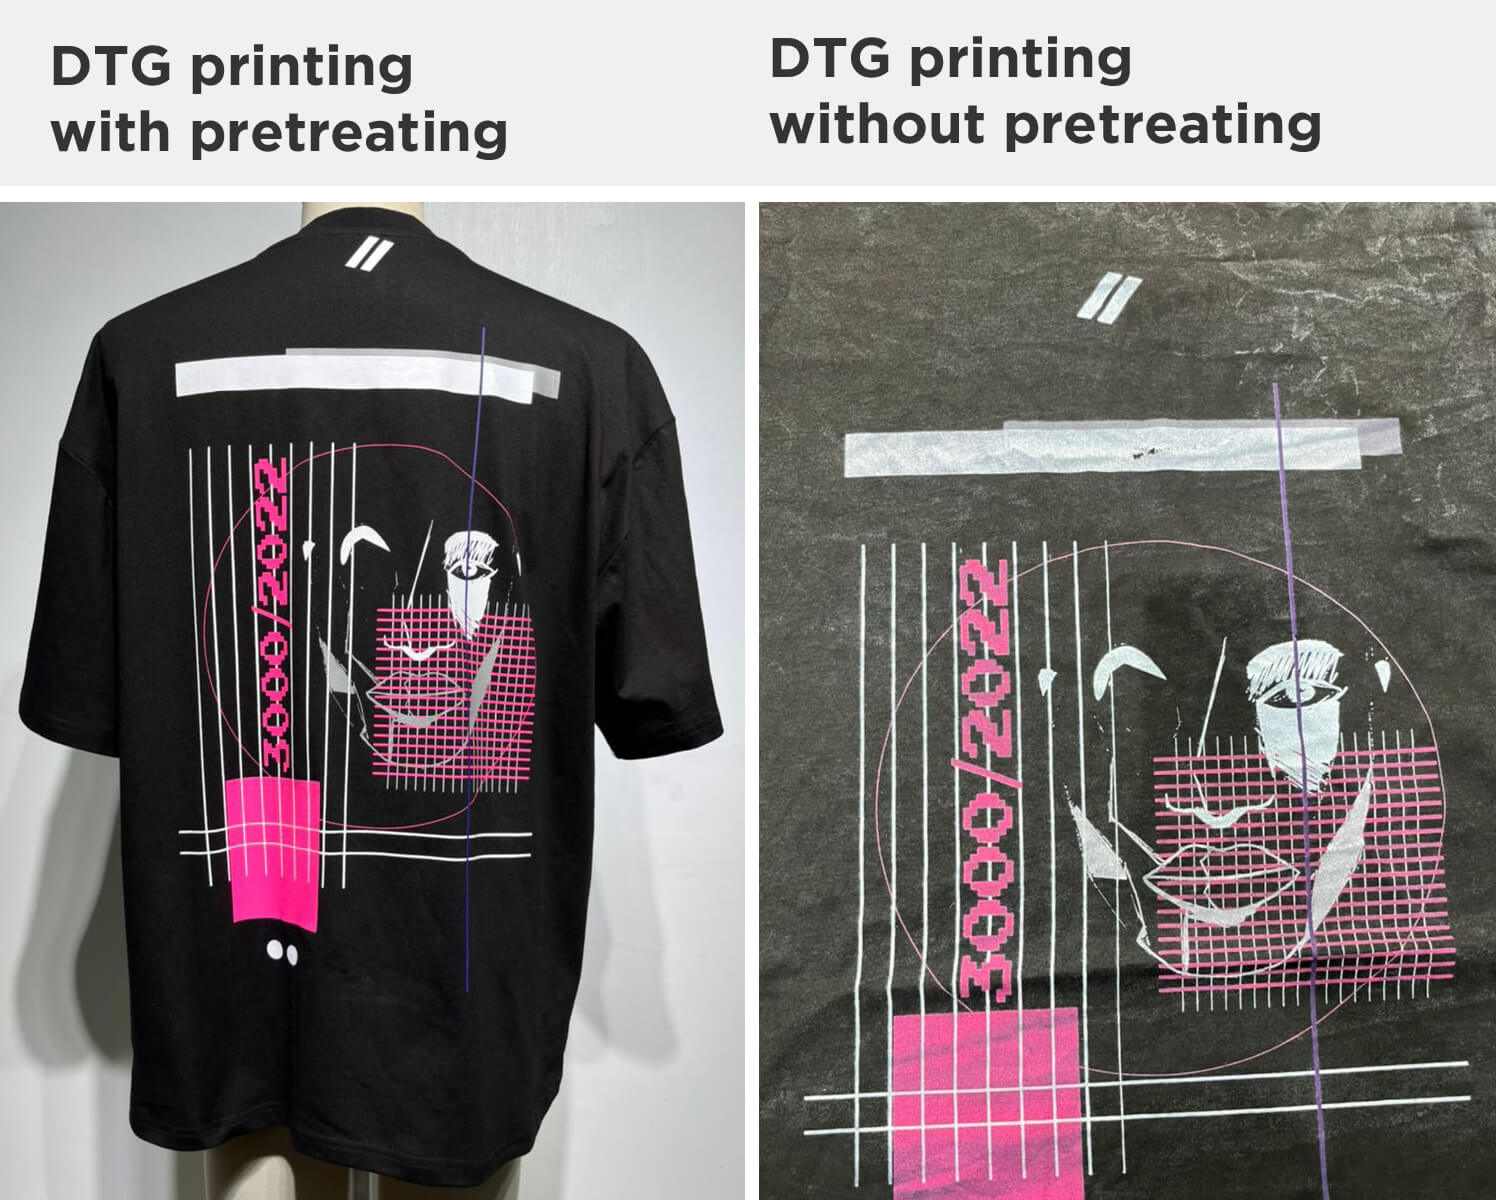 dtg printing with pretreating and without